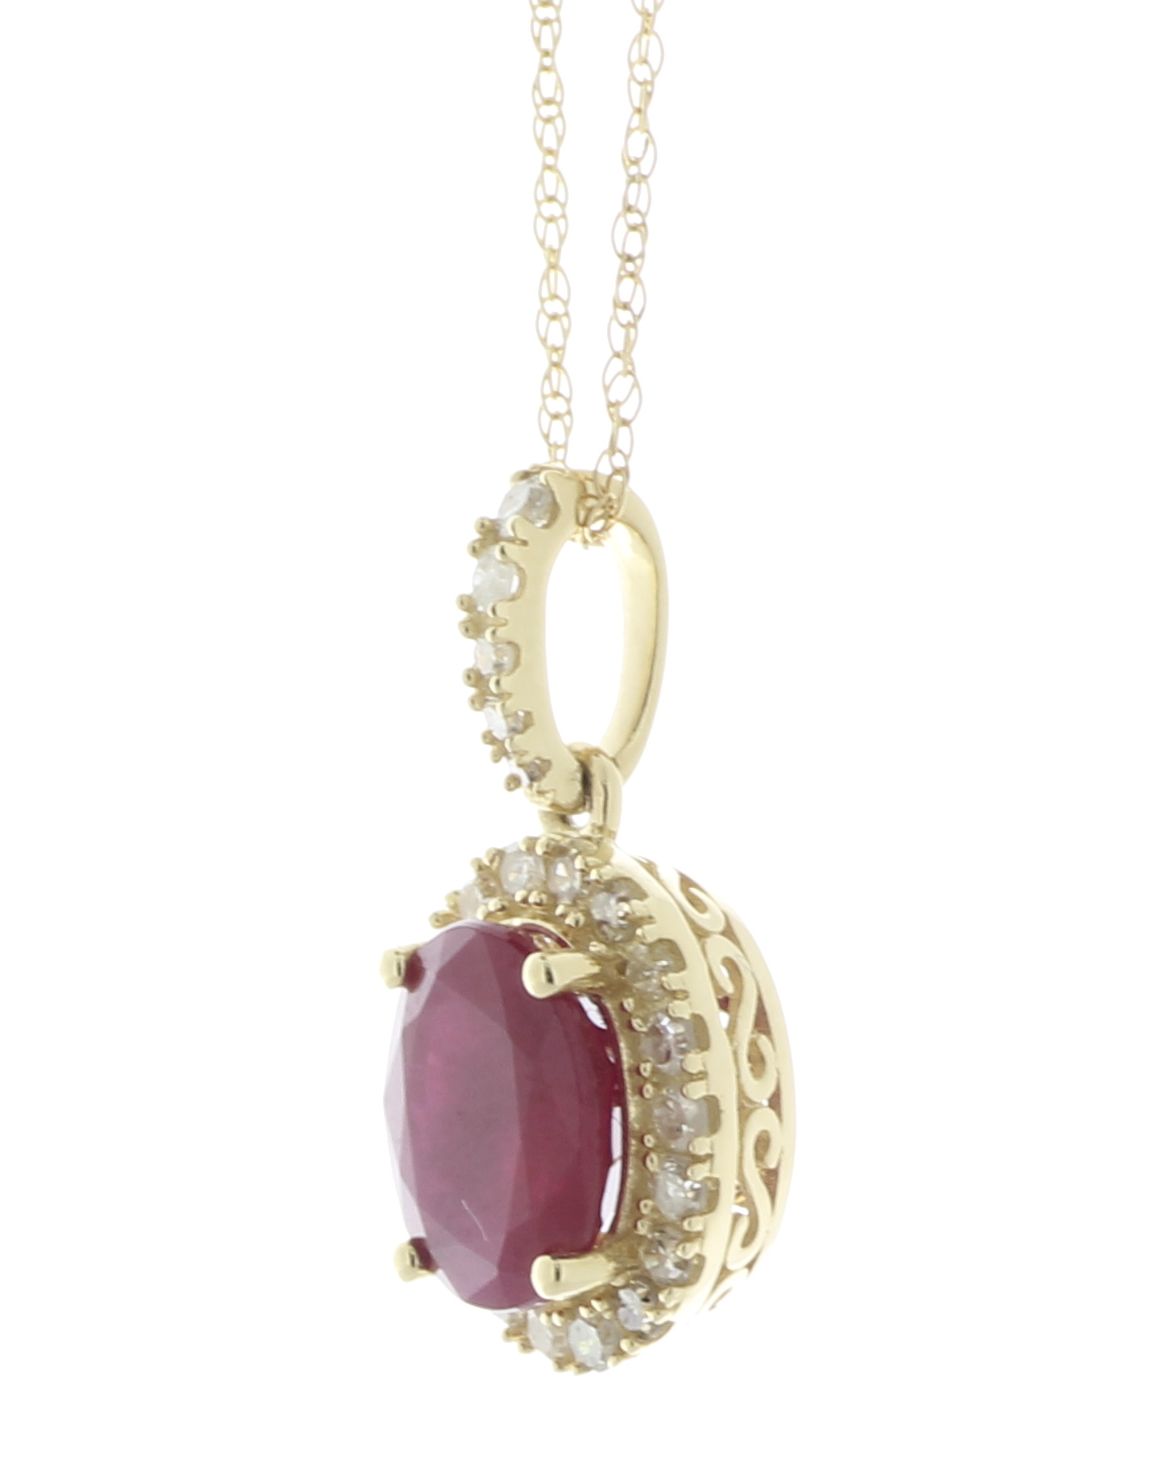 14ct Yellow Gold Oval Ruby and Diamond Pendant and Chain (R1.62) 0.26 Carats - Image 3 of 4